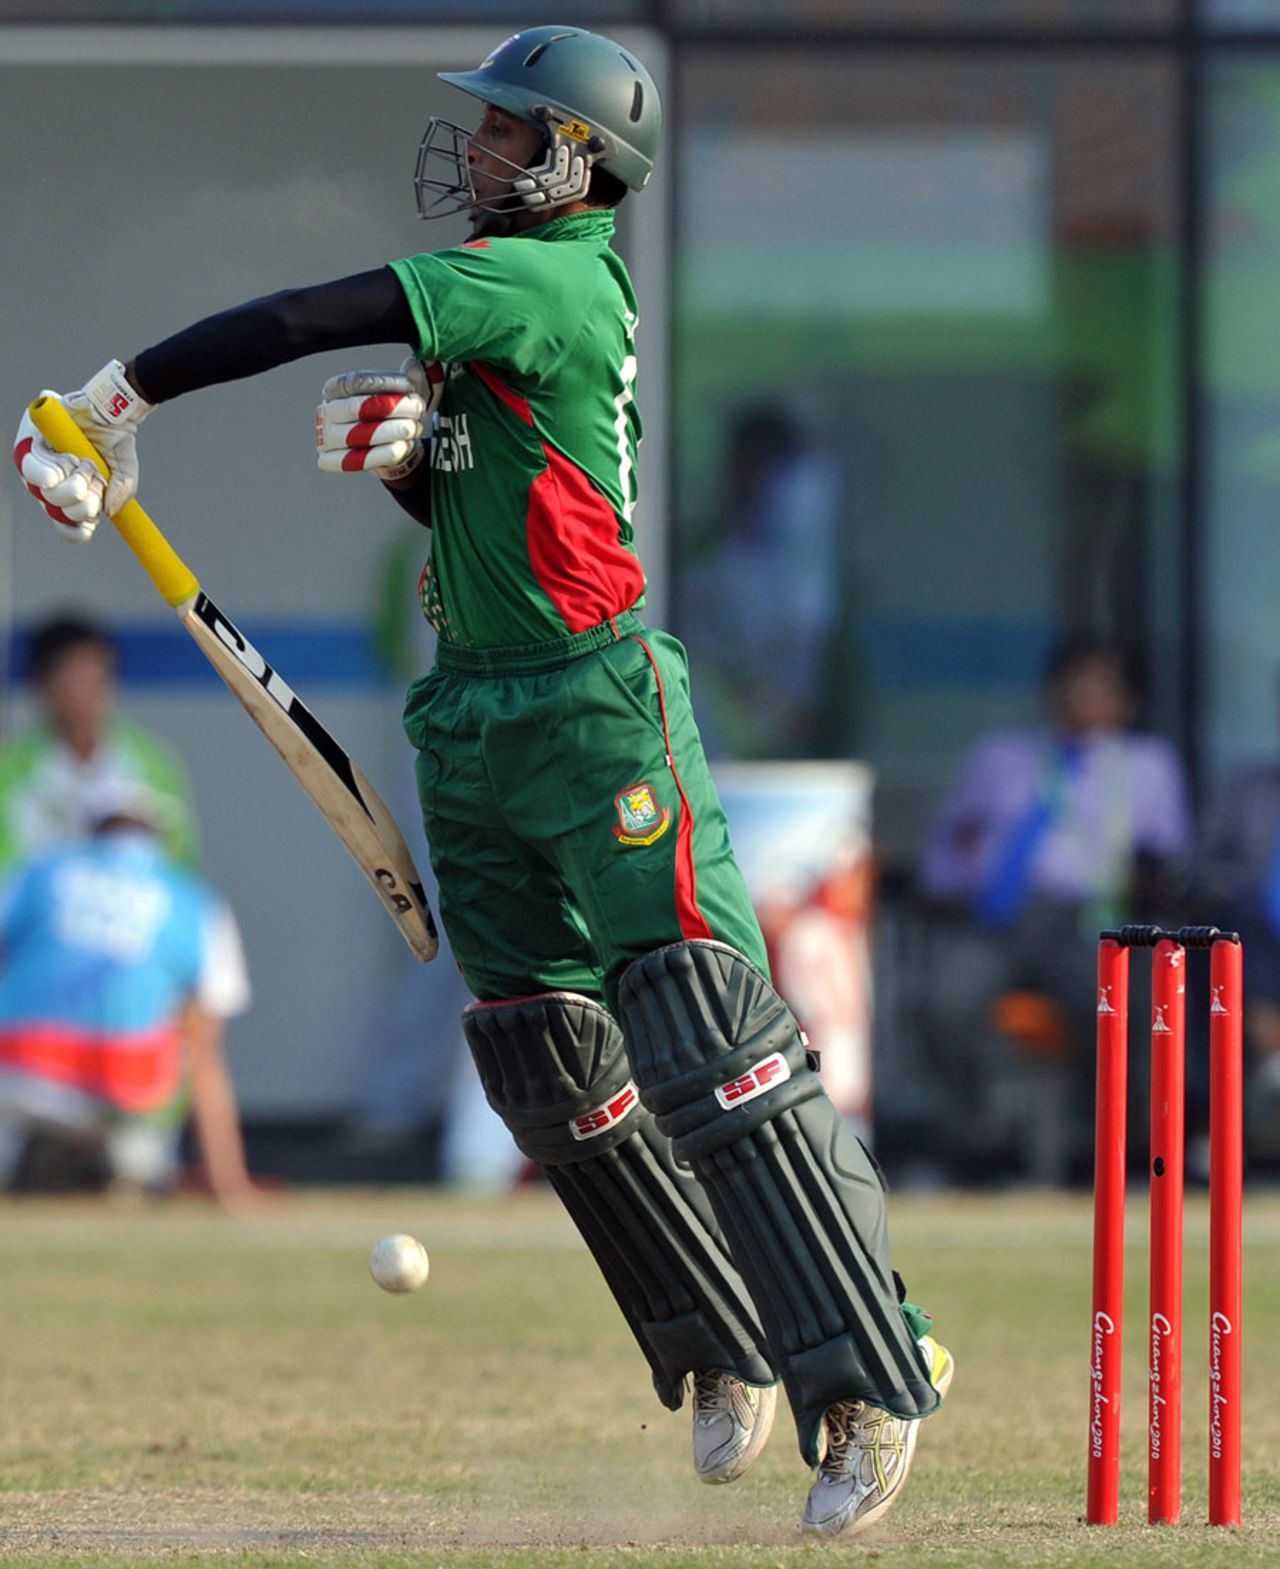 Naeem Islam top scored with an unbeaten 34 and played a crucial role in Bangladesh's win, Afghanistan v Bangladesh, final, Asian Games, Guangzhou, November 26, 2010